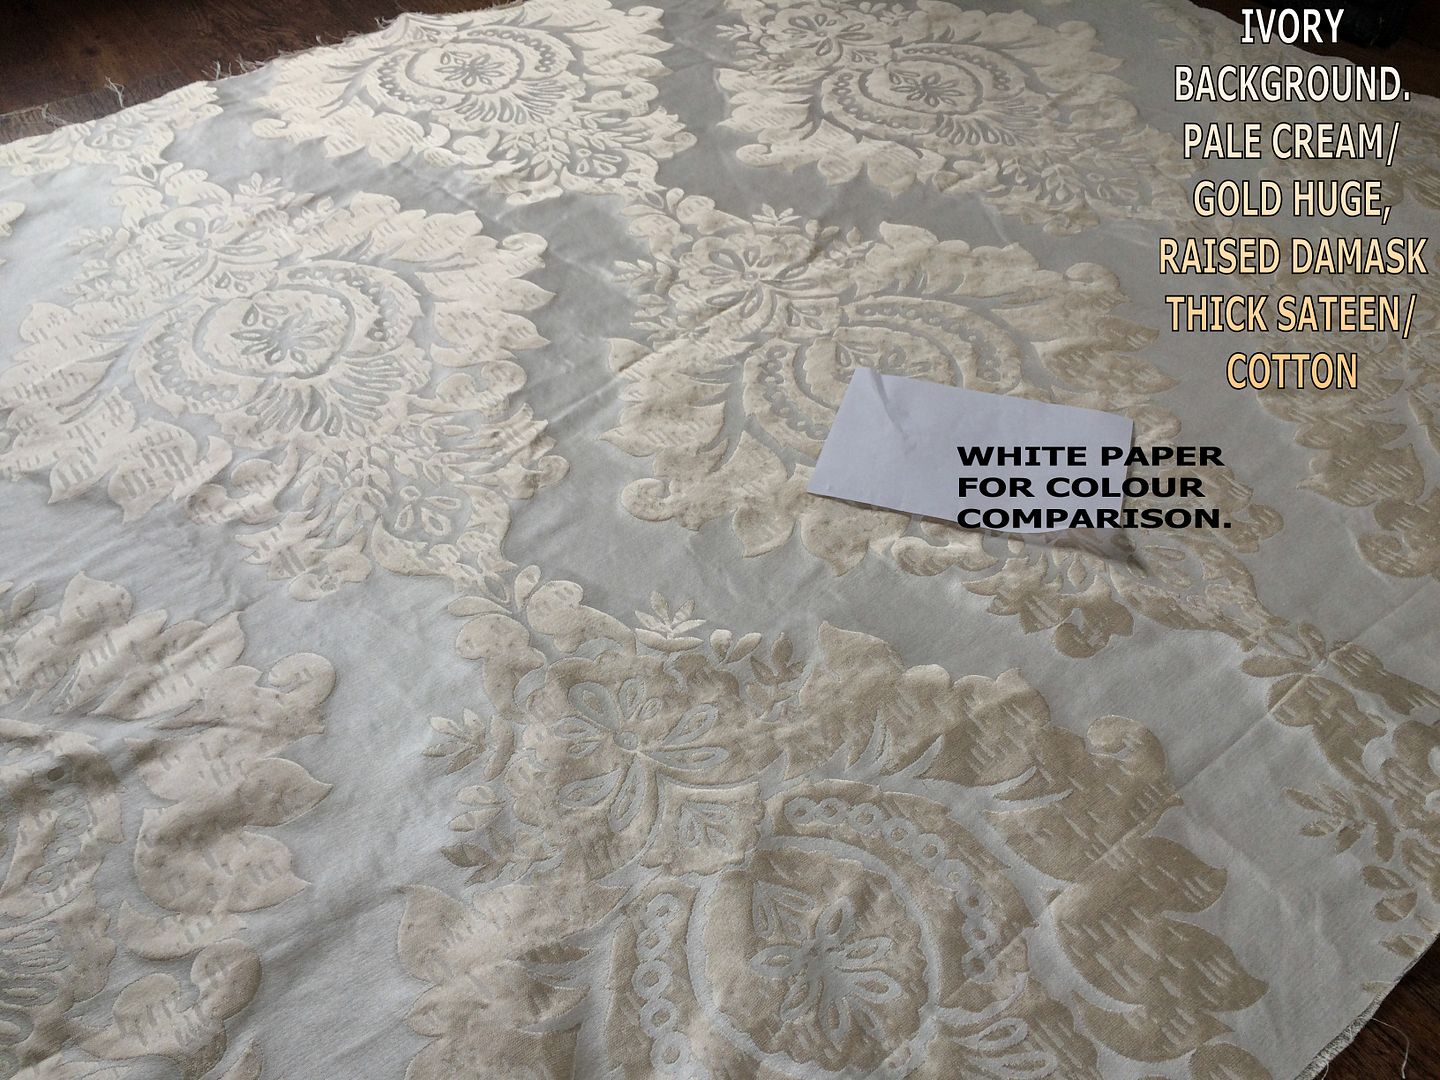  photo 2 PIECES IVORY CREAM GOLD HUGE DAMASK COTTON SATEEN THICK HEAVY WITH TEXT 21_zpslrwsgg14.jpg